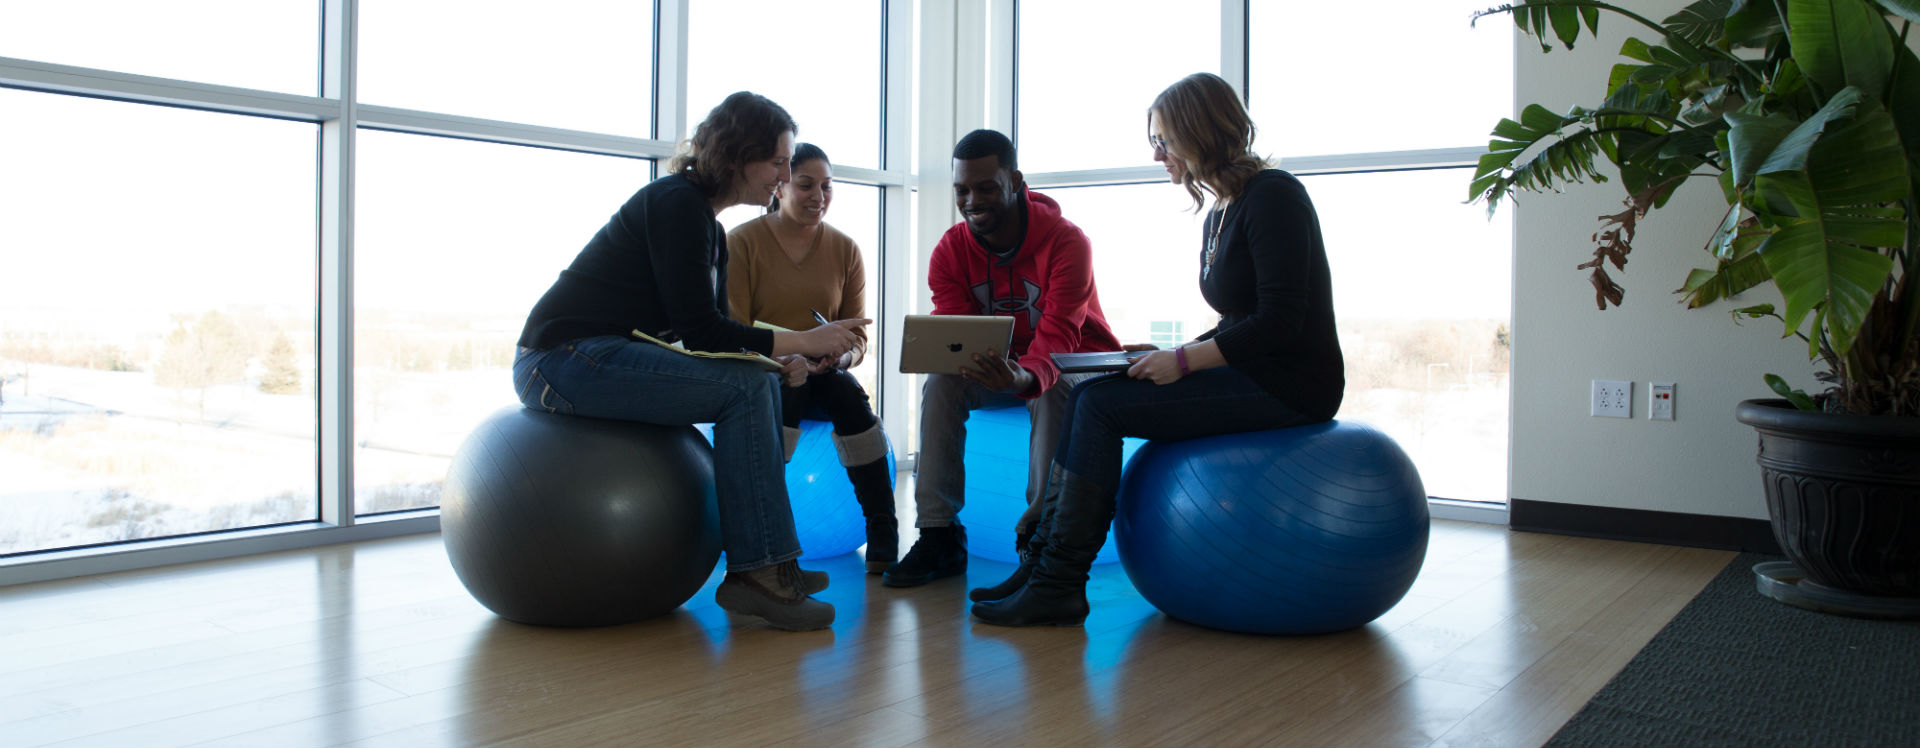 Four people in a circle sitting on blue fitness balls.